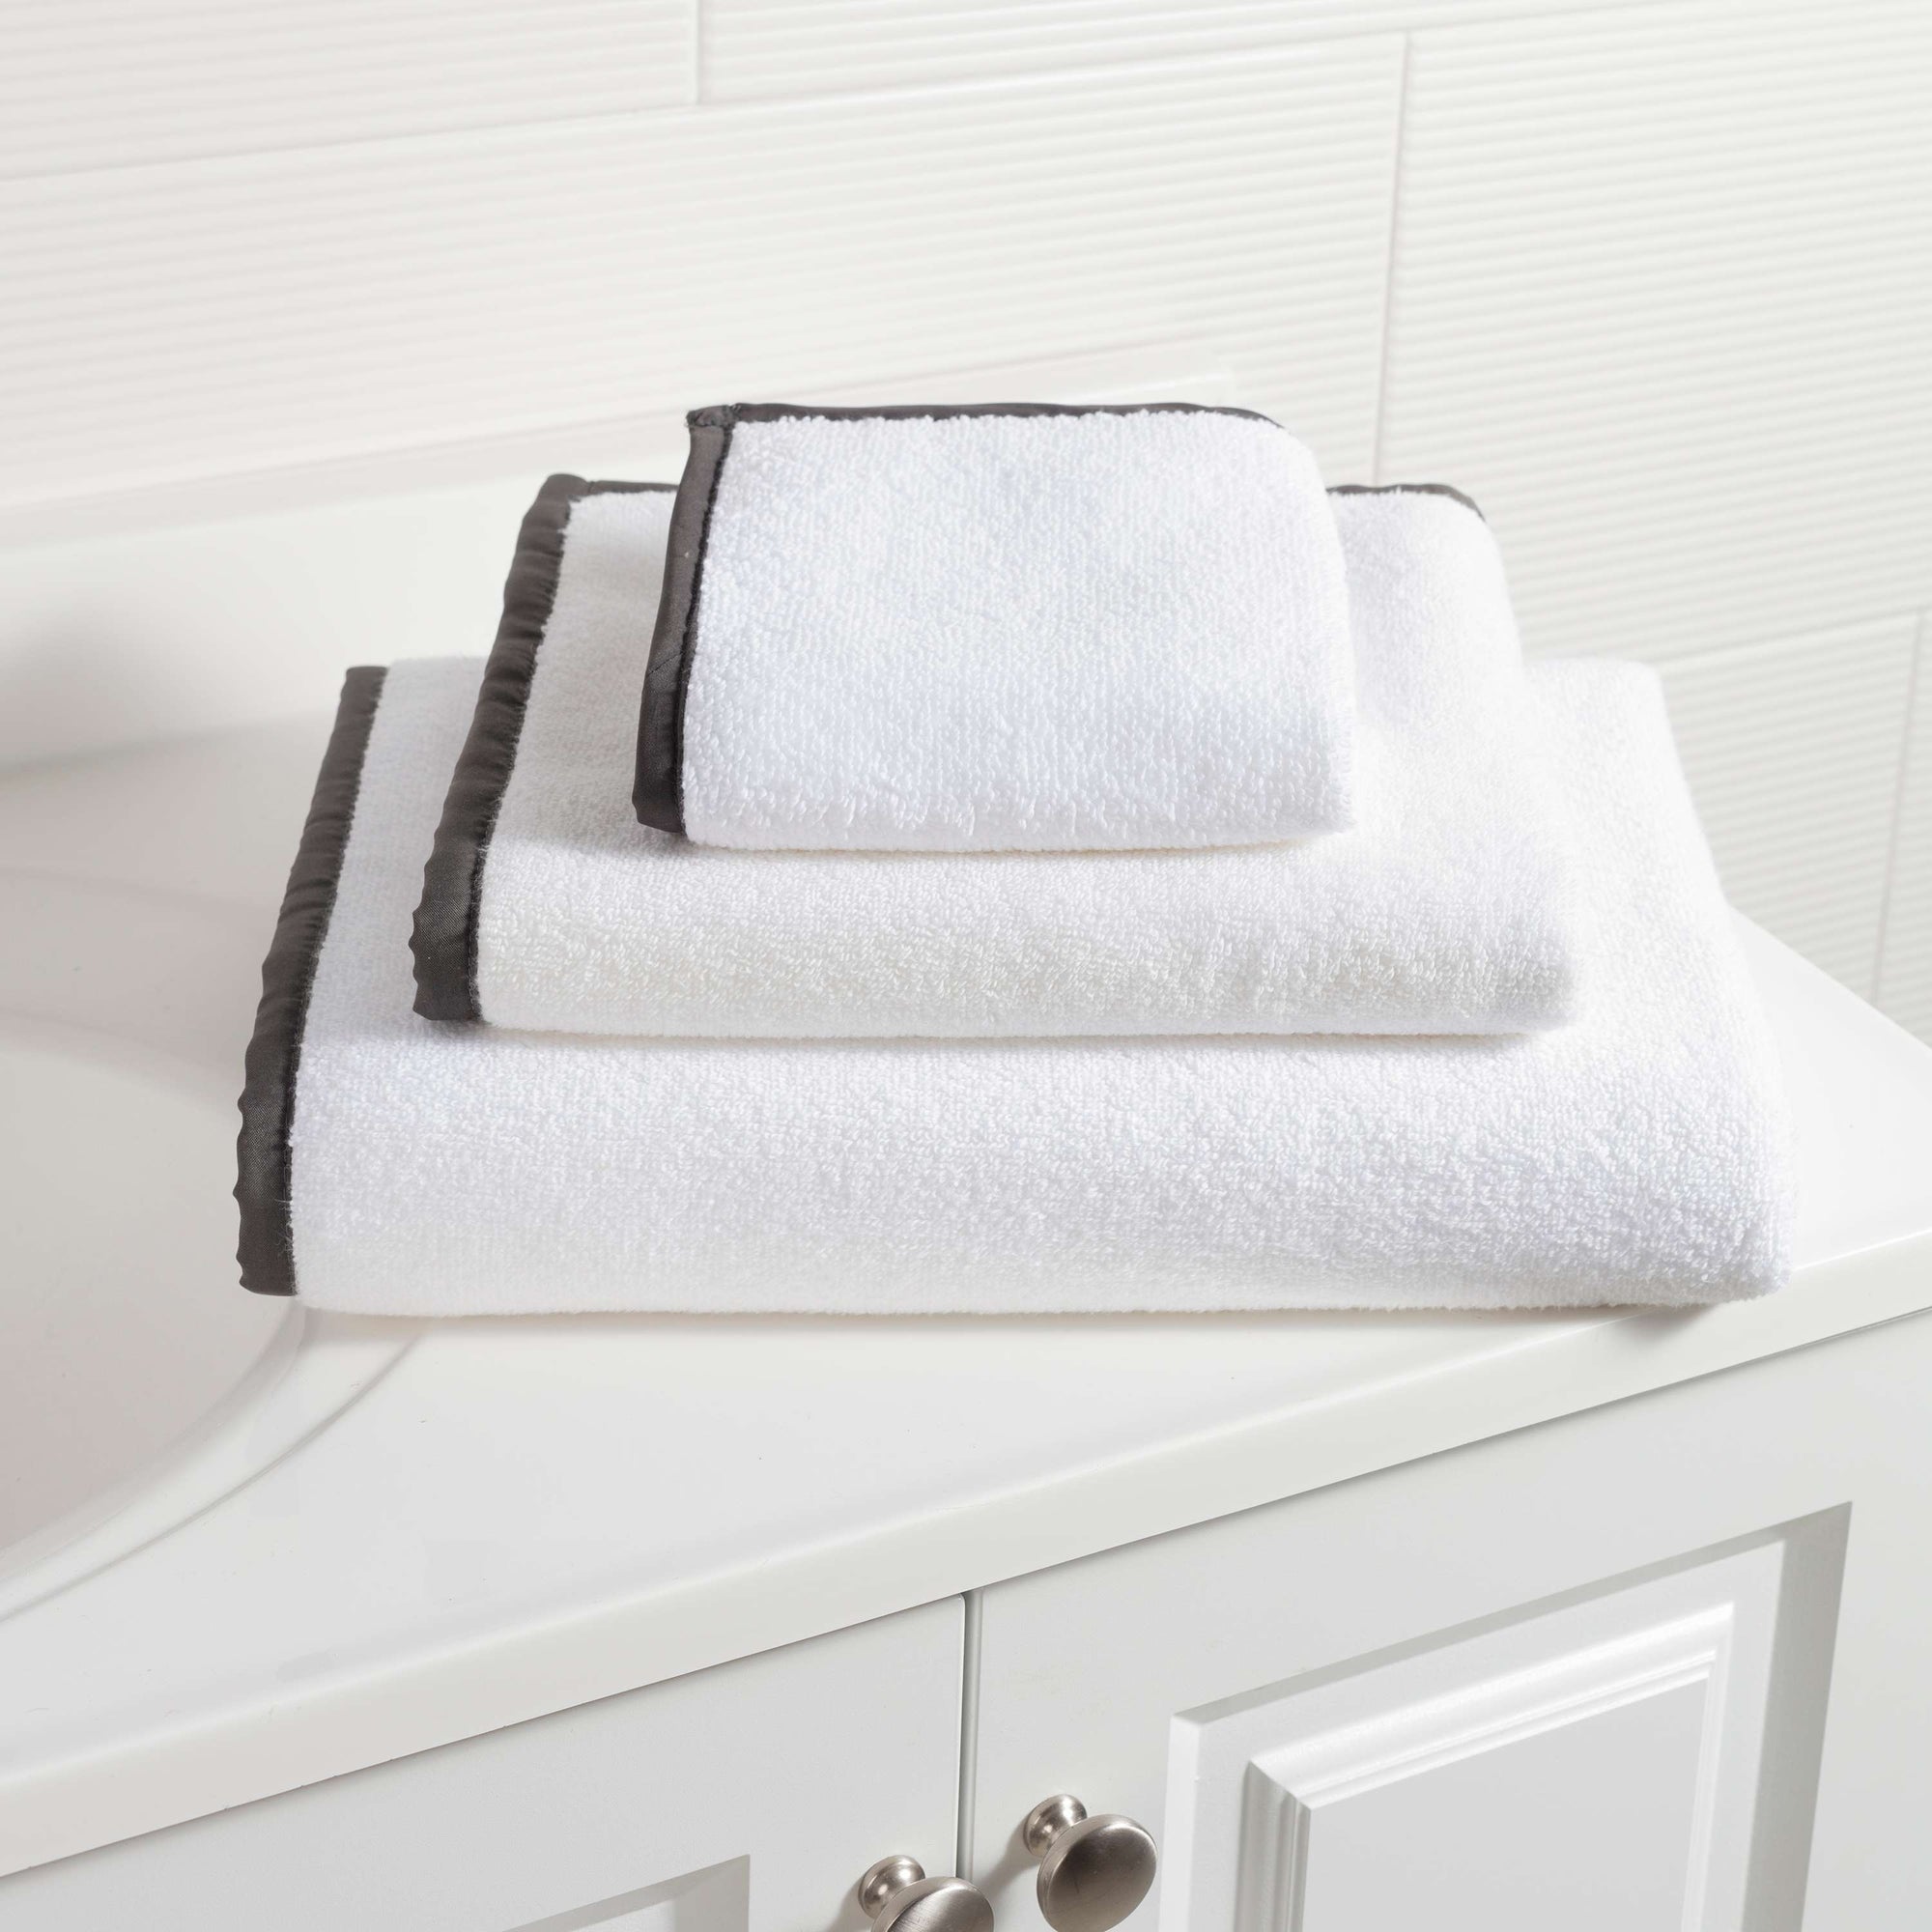 Buy Hand Crafted Farmhouse Grainstripe Towel Set With Sewn Corner Hangers,  made to order from Crafty Hobbit Rehab & Design